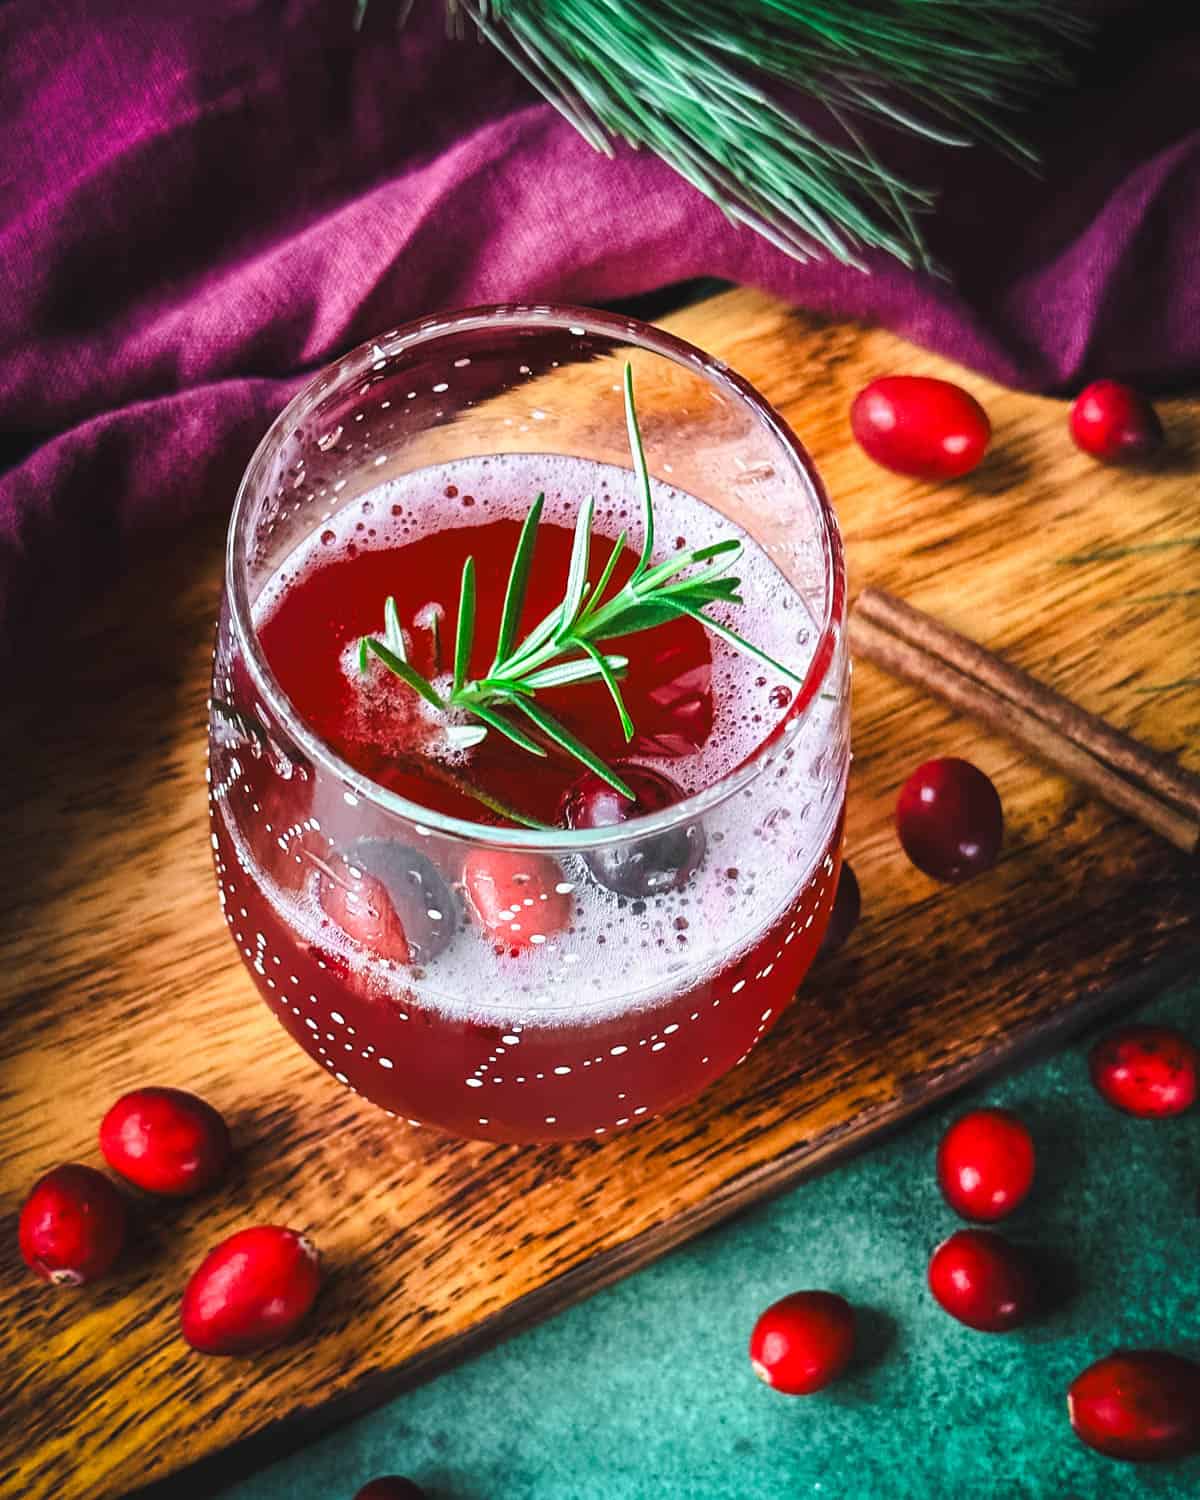 A cranberry champagne cocktail garnished with whole cranberries and rosemary, top view. On a wood and green surface, surrounded by fresh cranberries and a red cloth. 